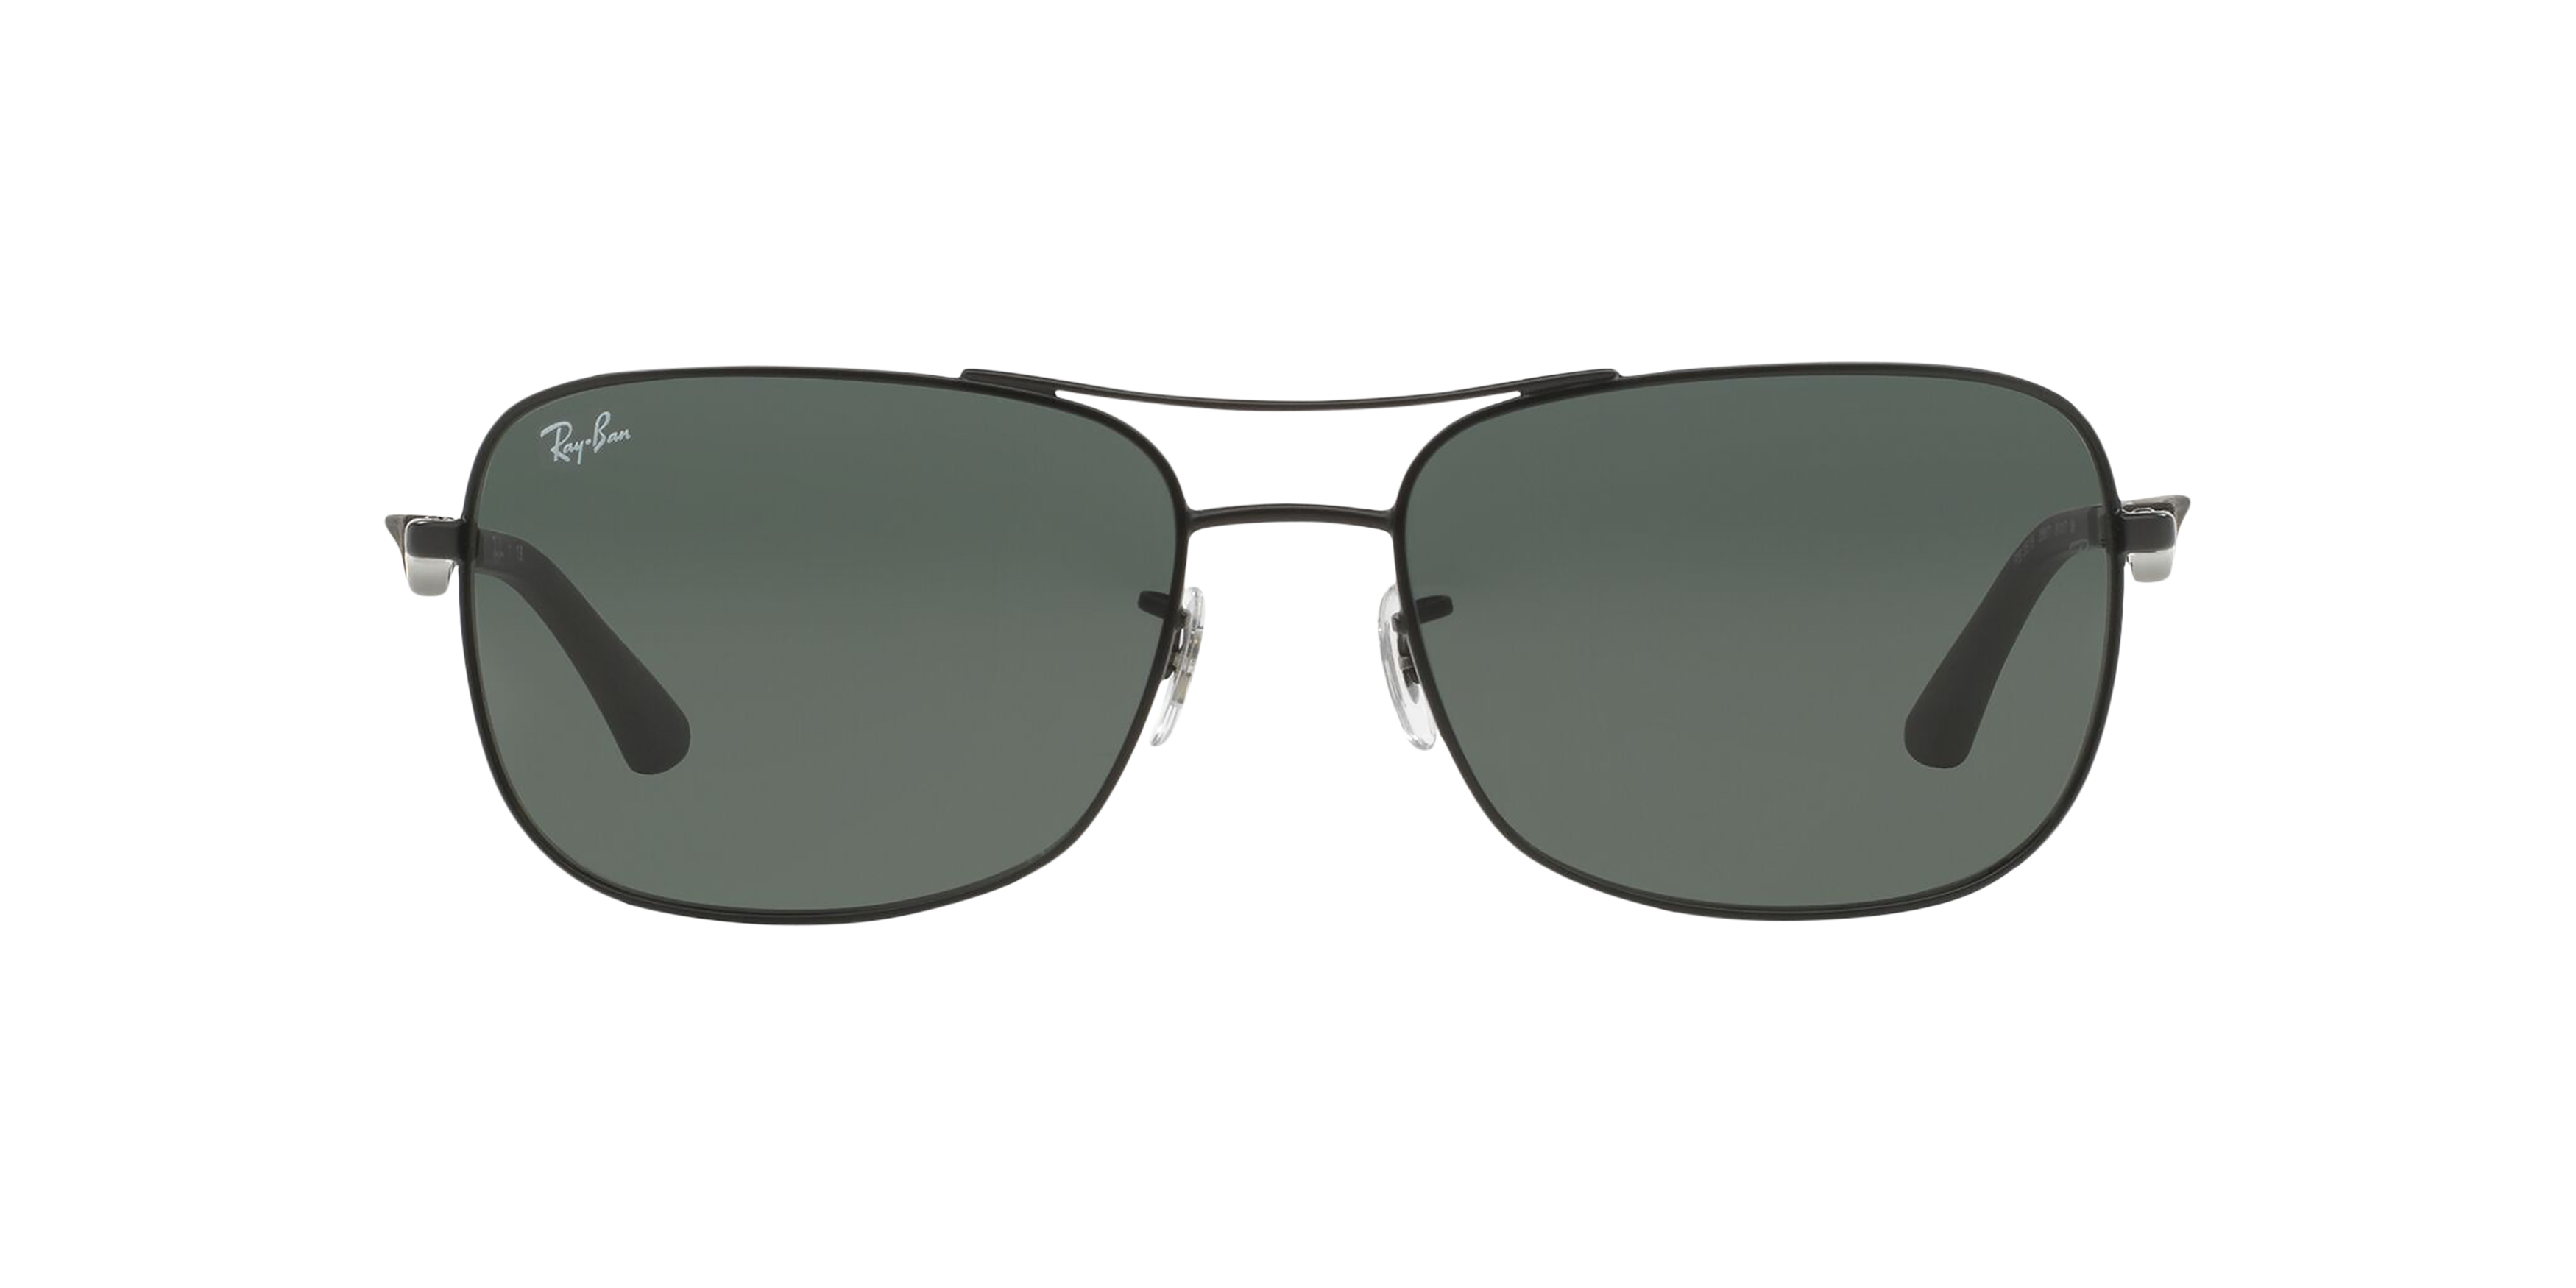 [products.image.front] Ray-Ban RB3515 006/71